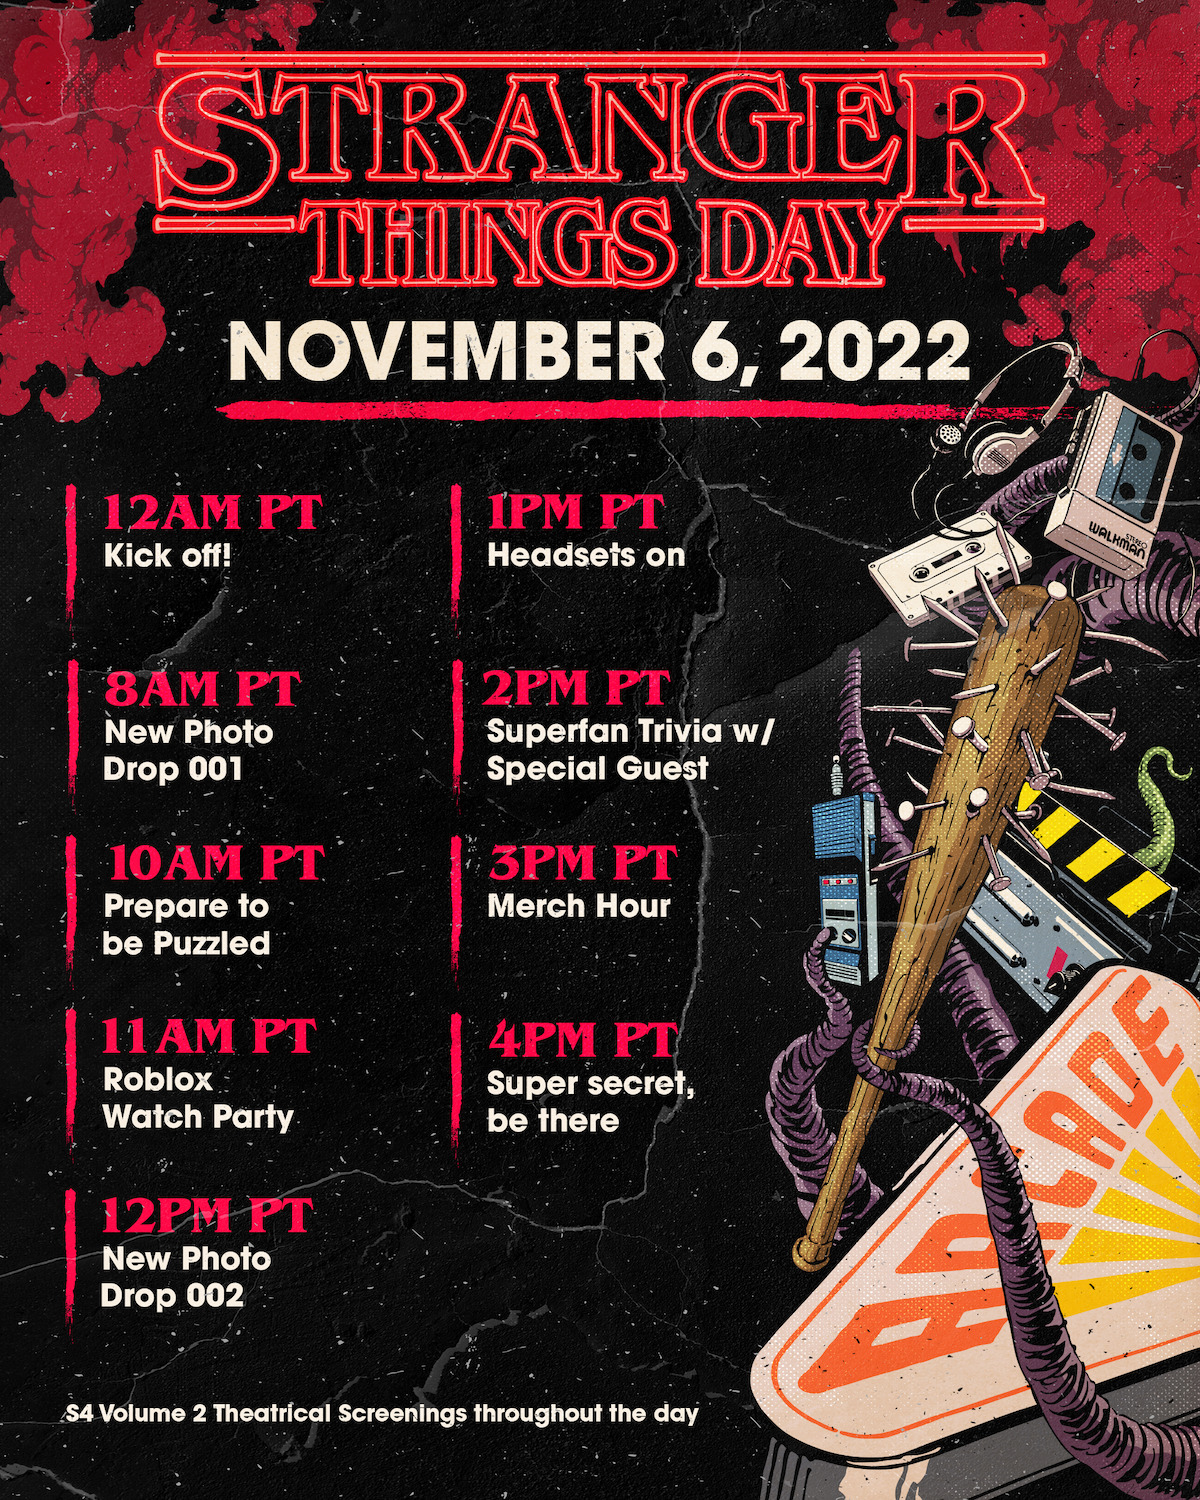 Watch Stranger Things  Netflix Official Site